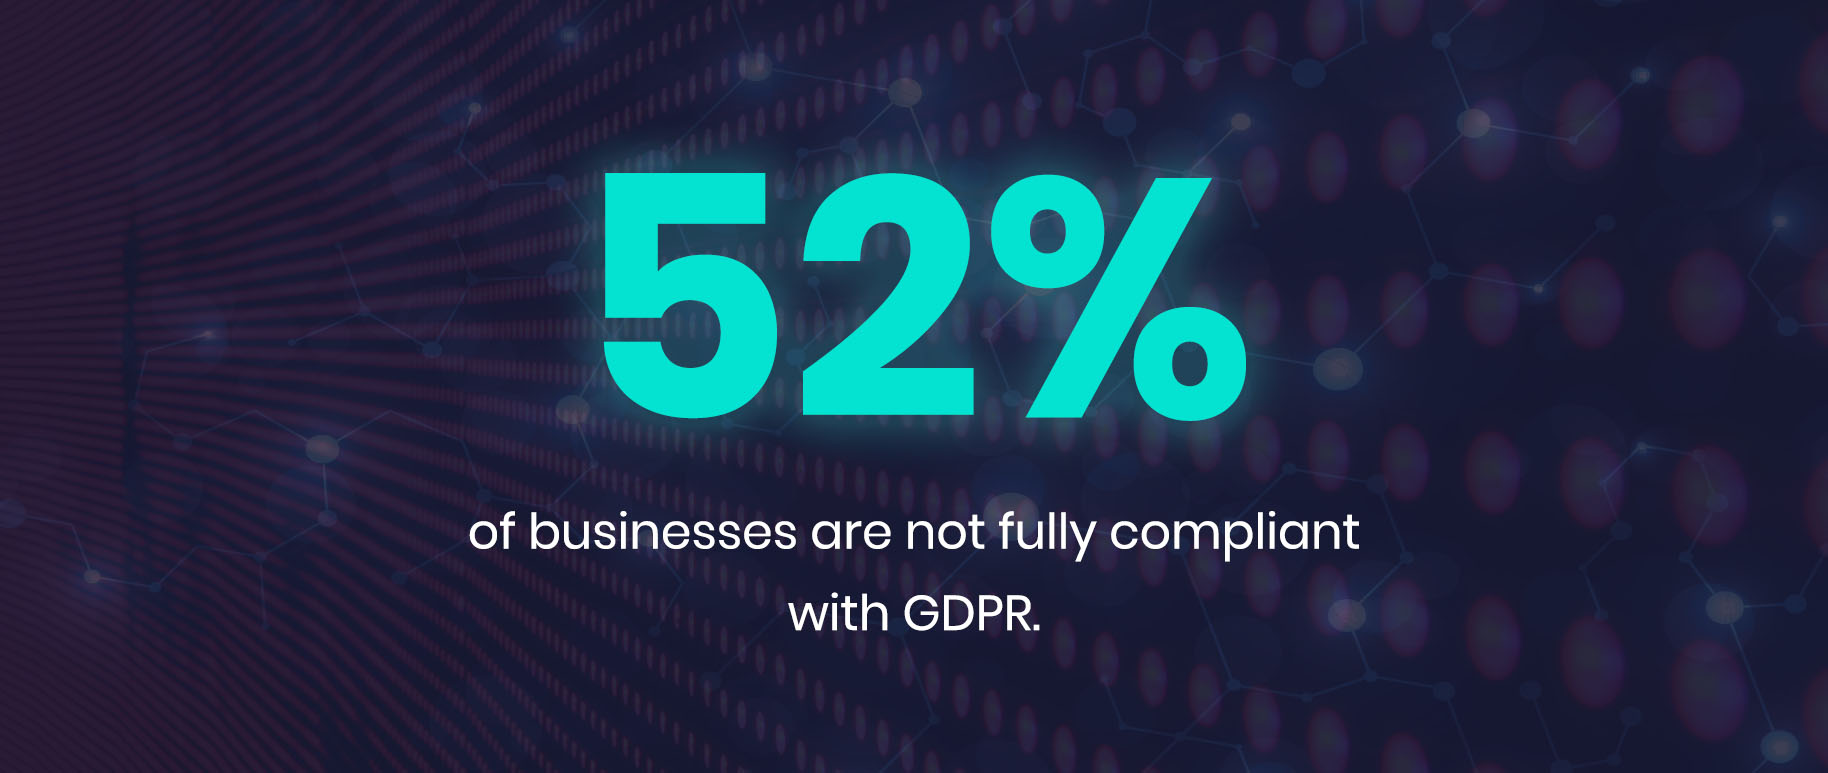 52% of businesses are not fully compliant with GDPR